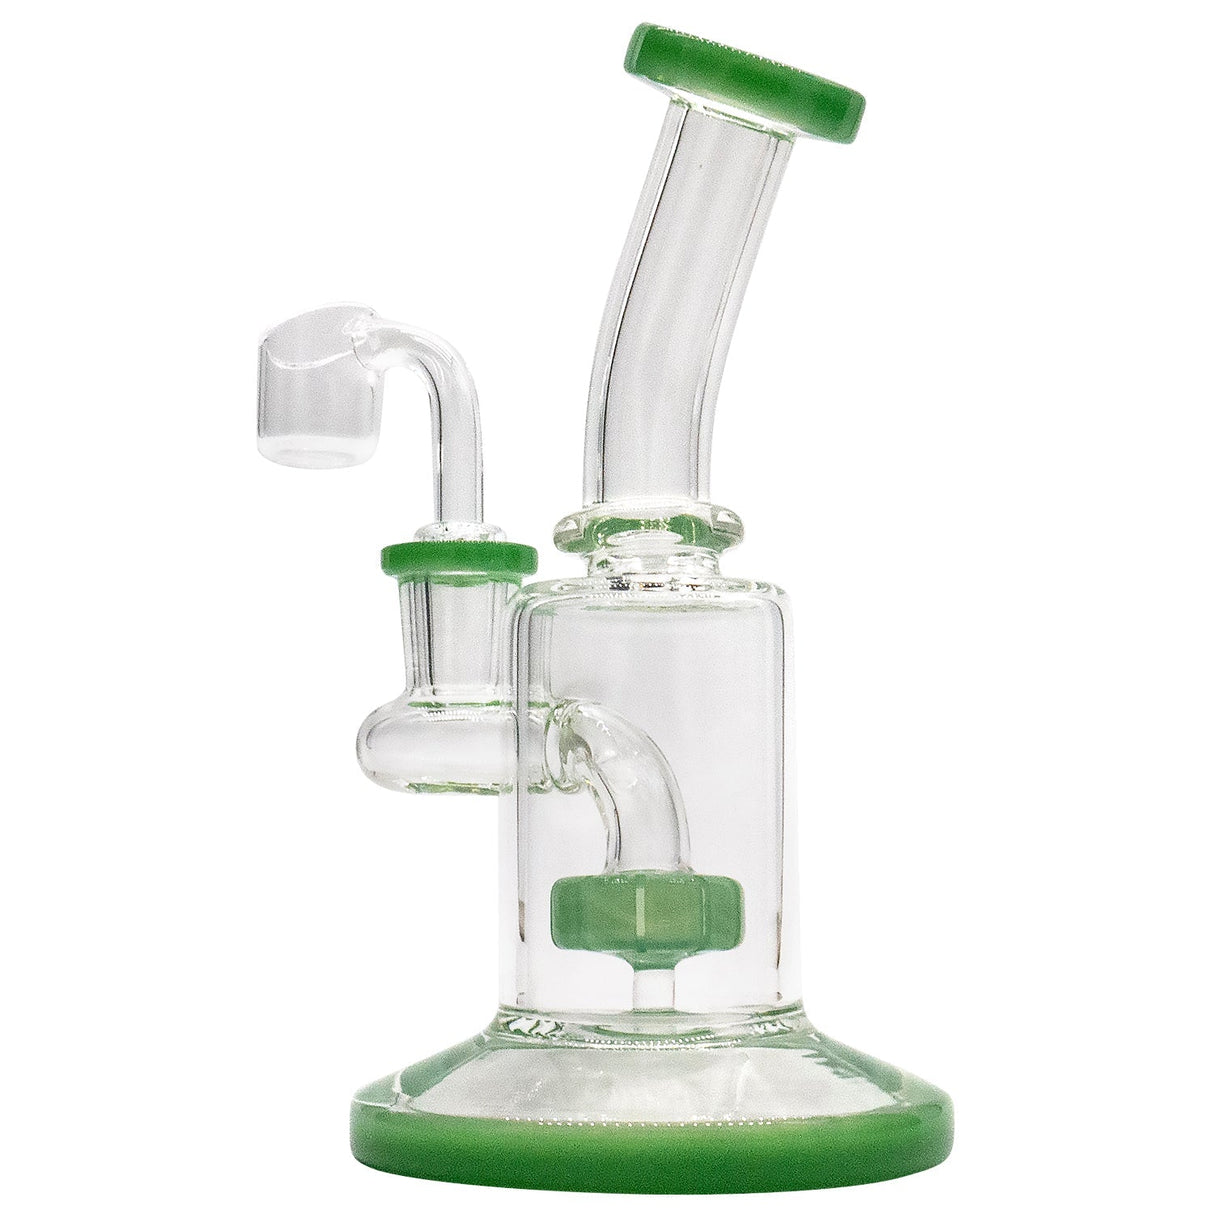 Glassic's "Spritz" 6.5" Dab Rig with green shower-head perc and angled neck on white background